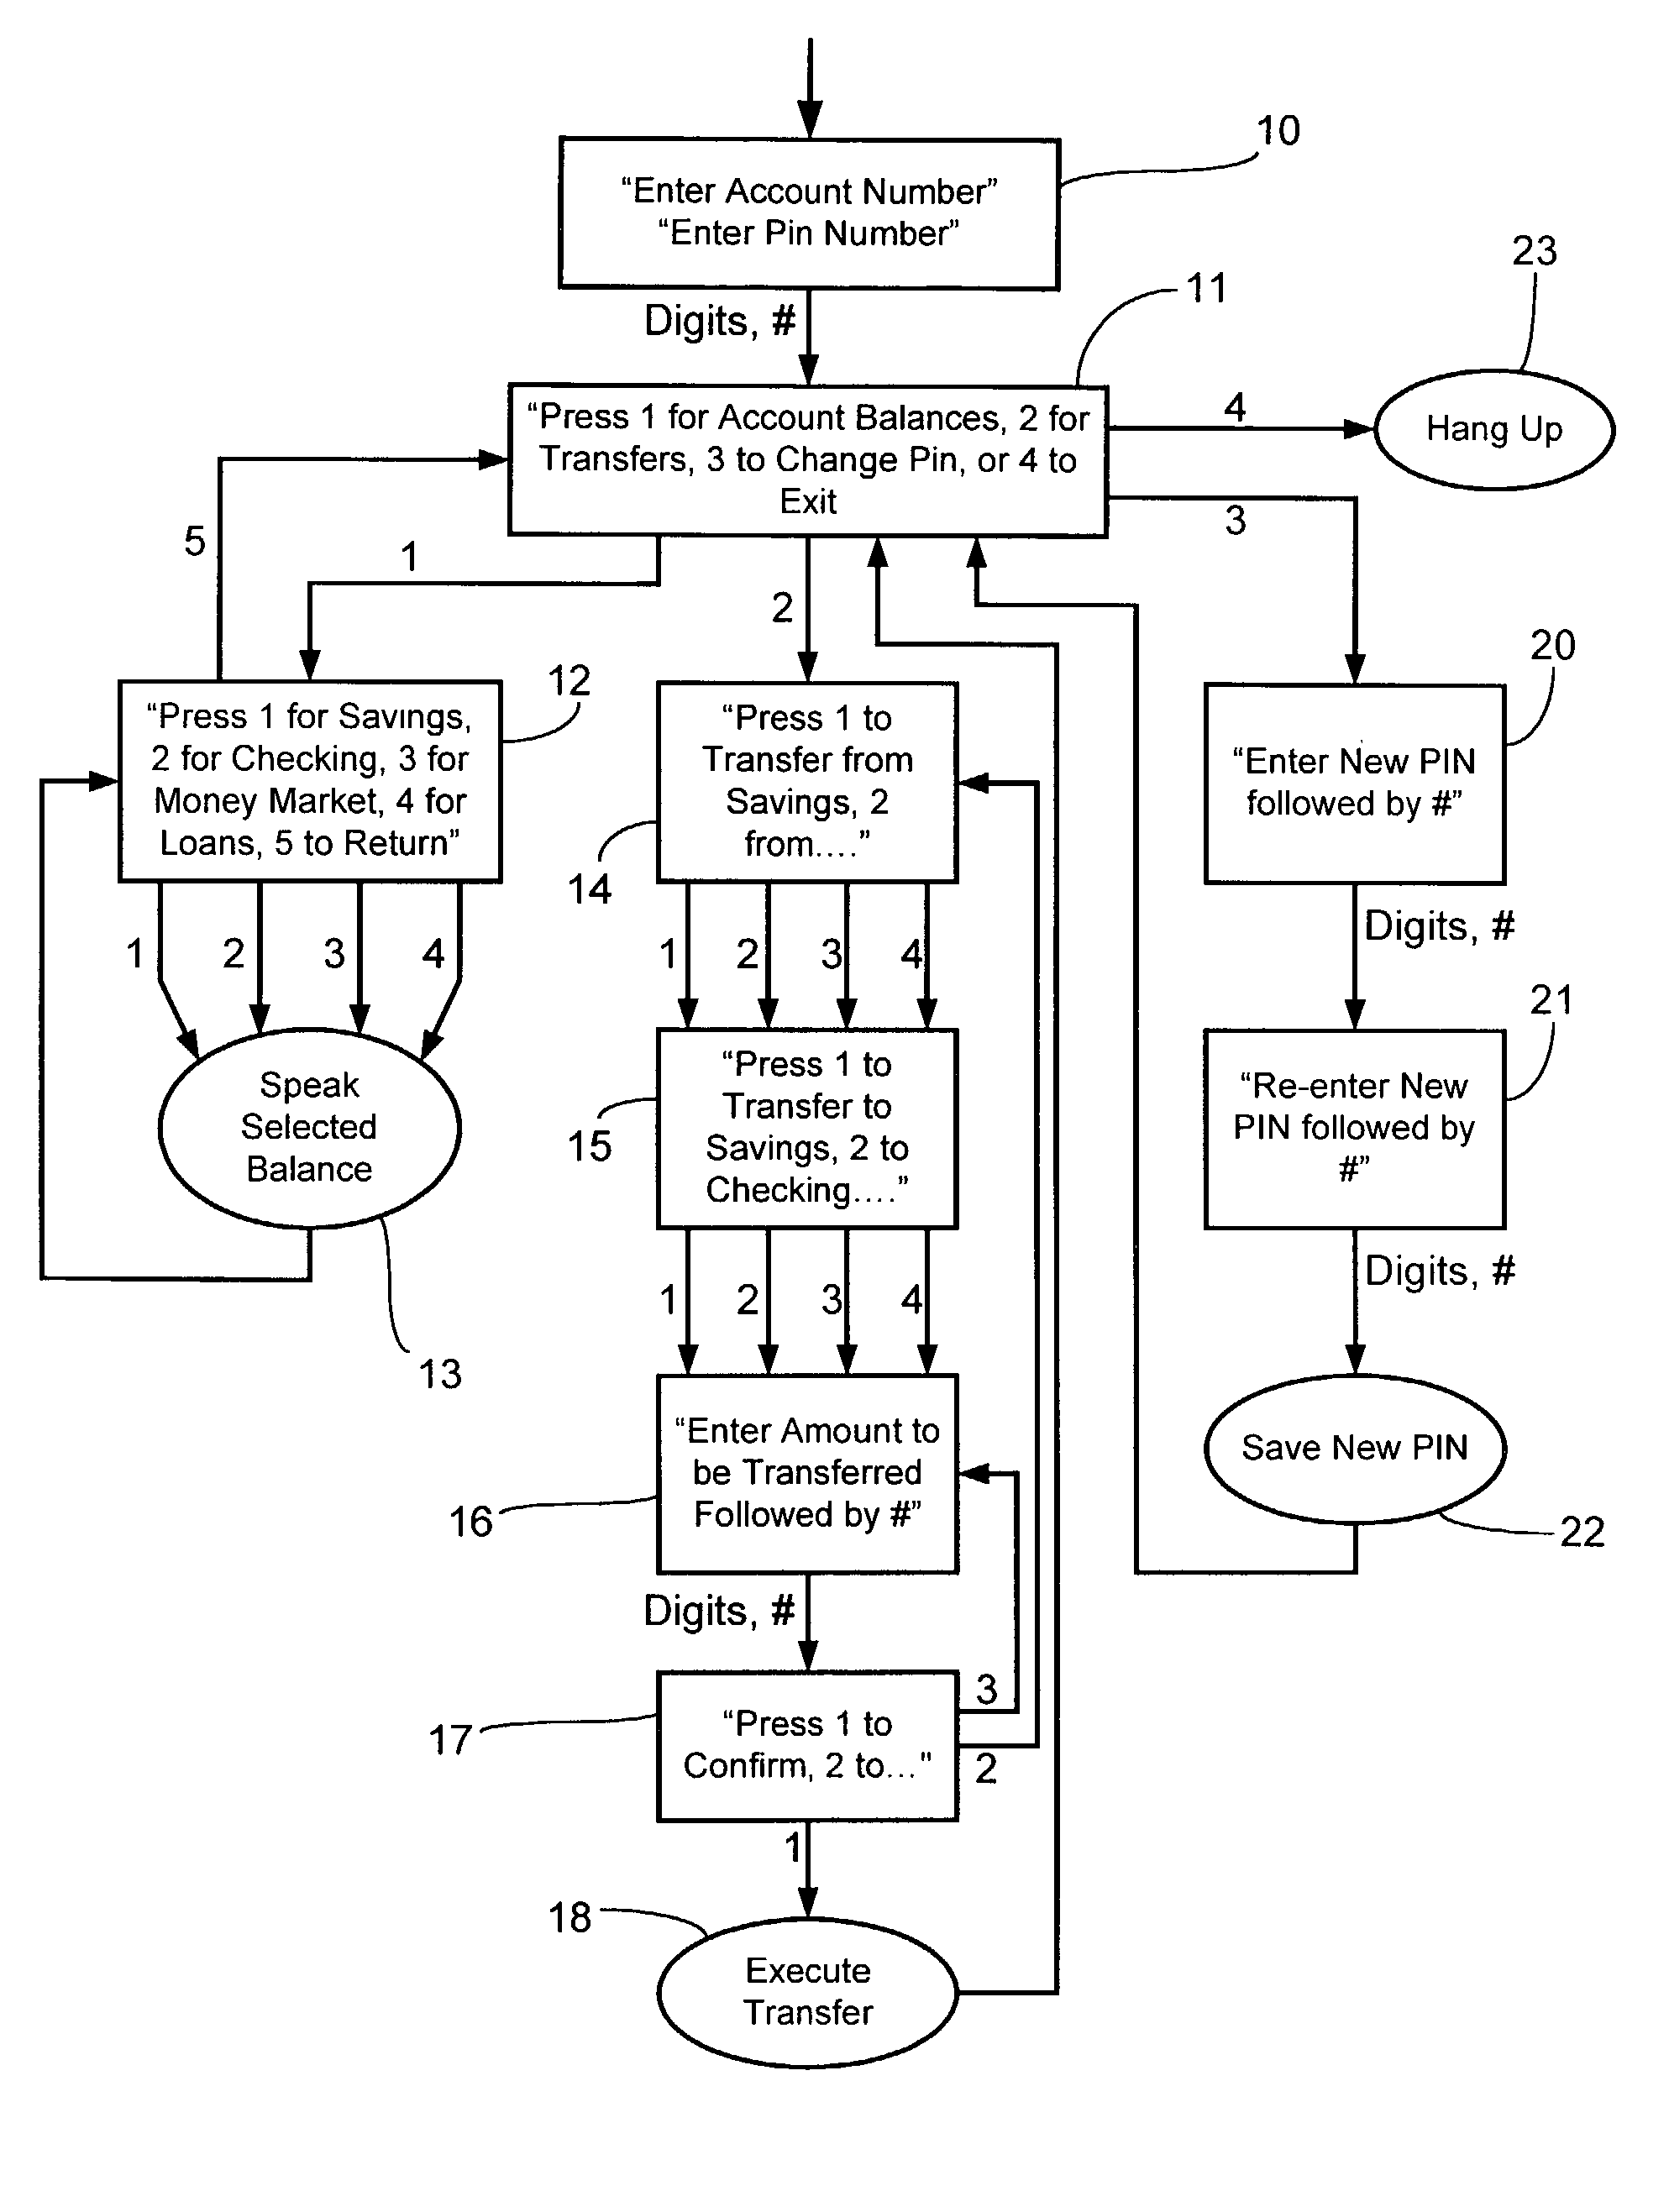 Accelerator for intelligent voice response system